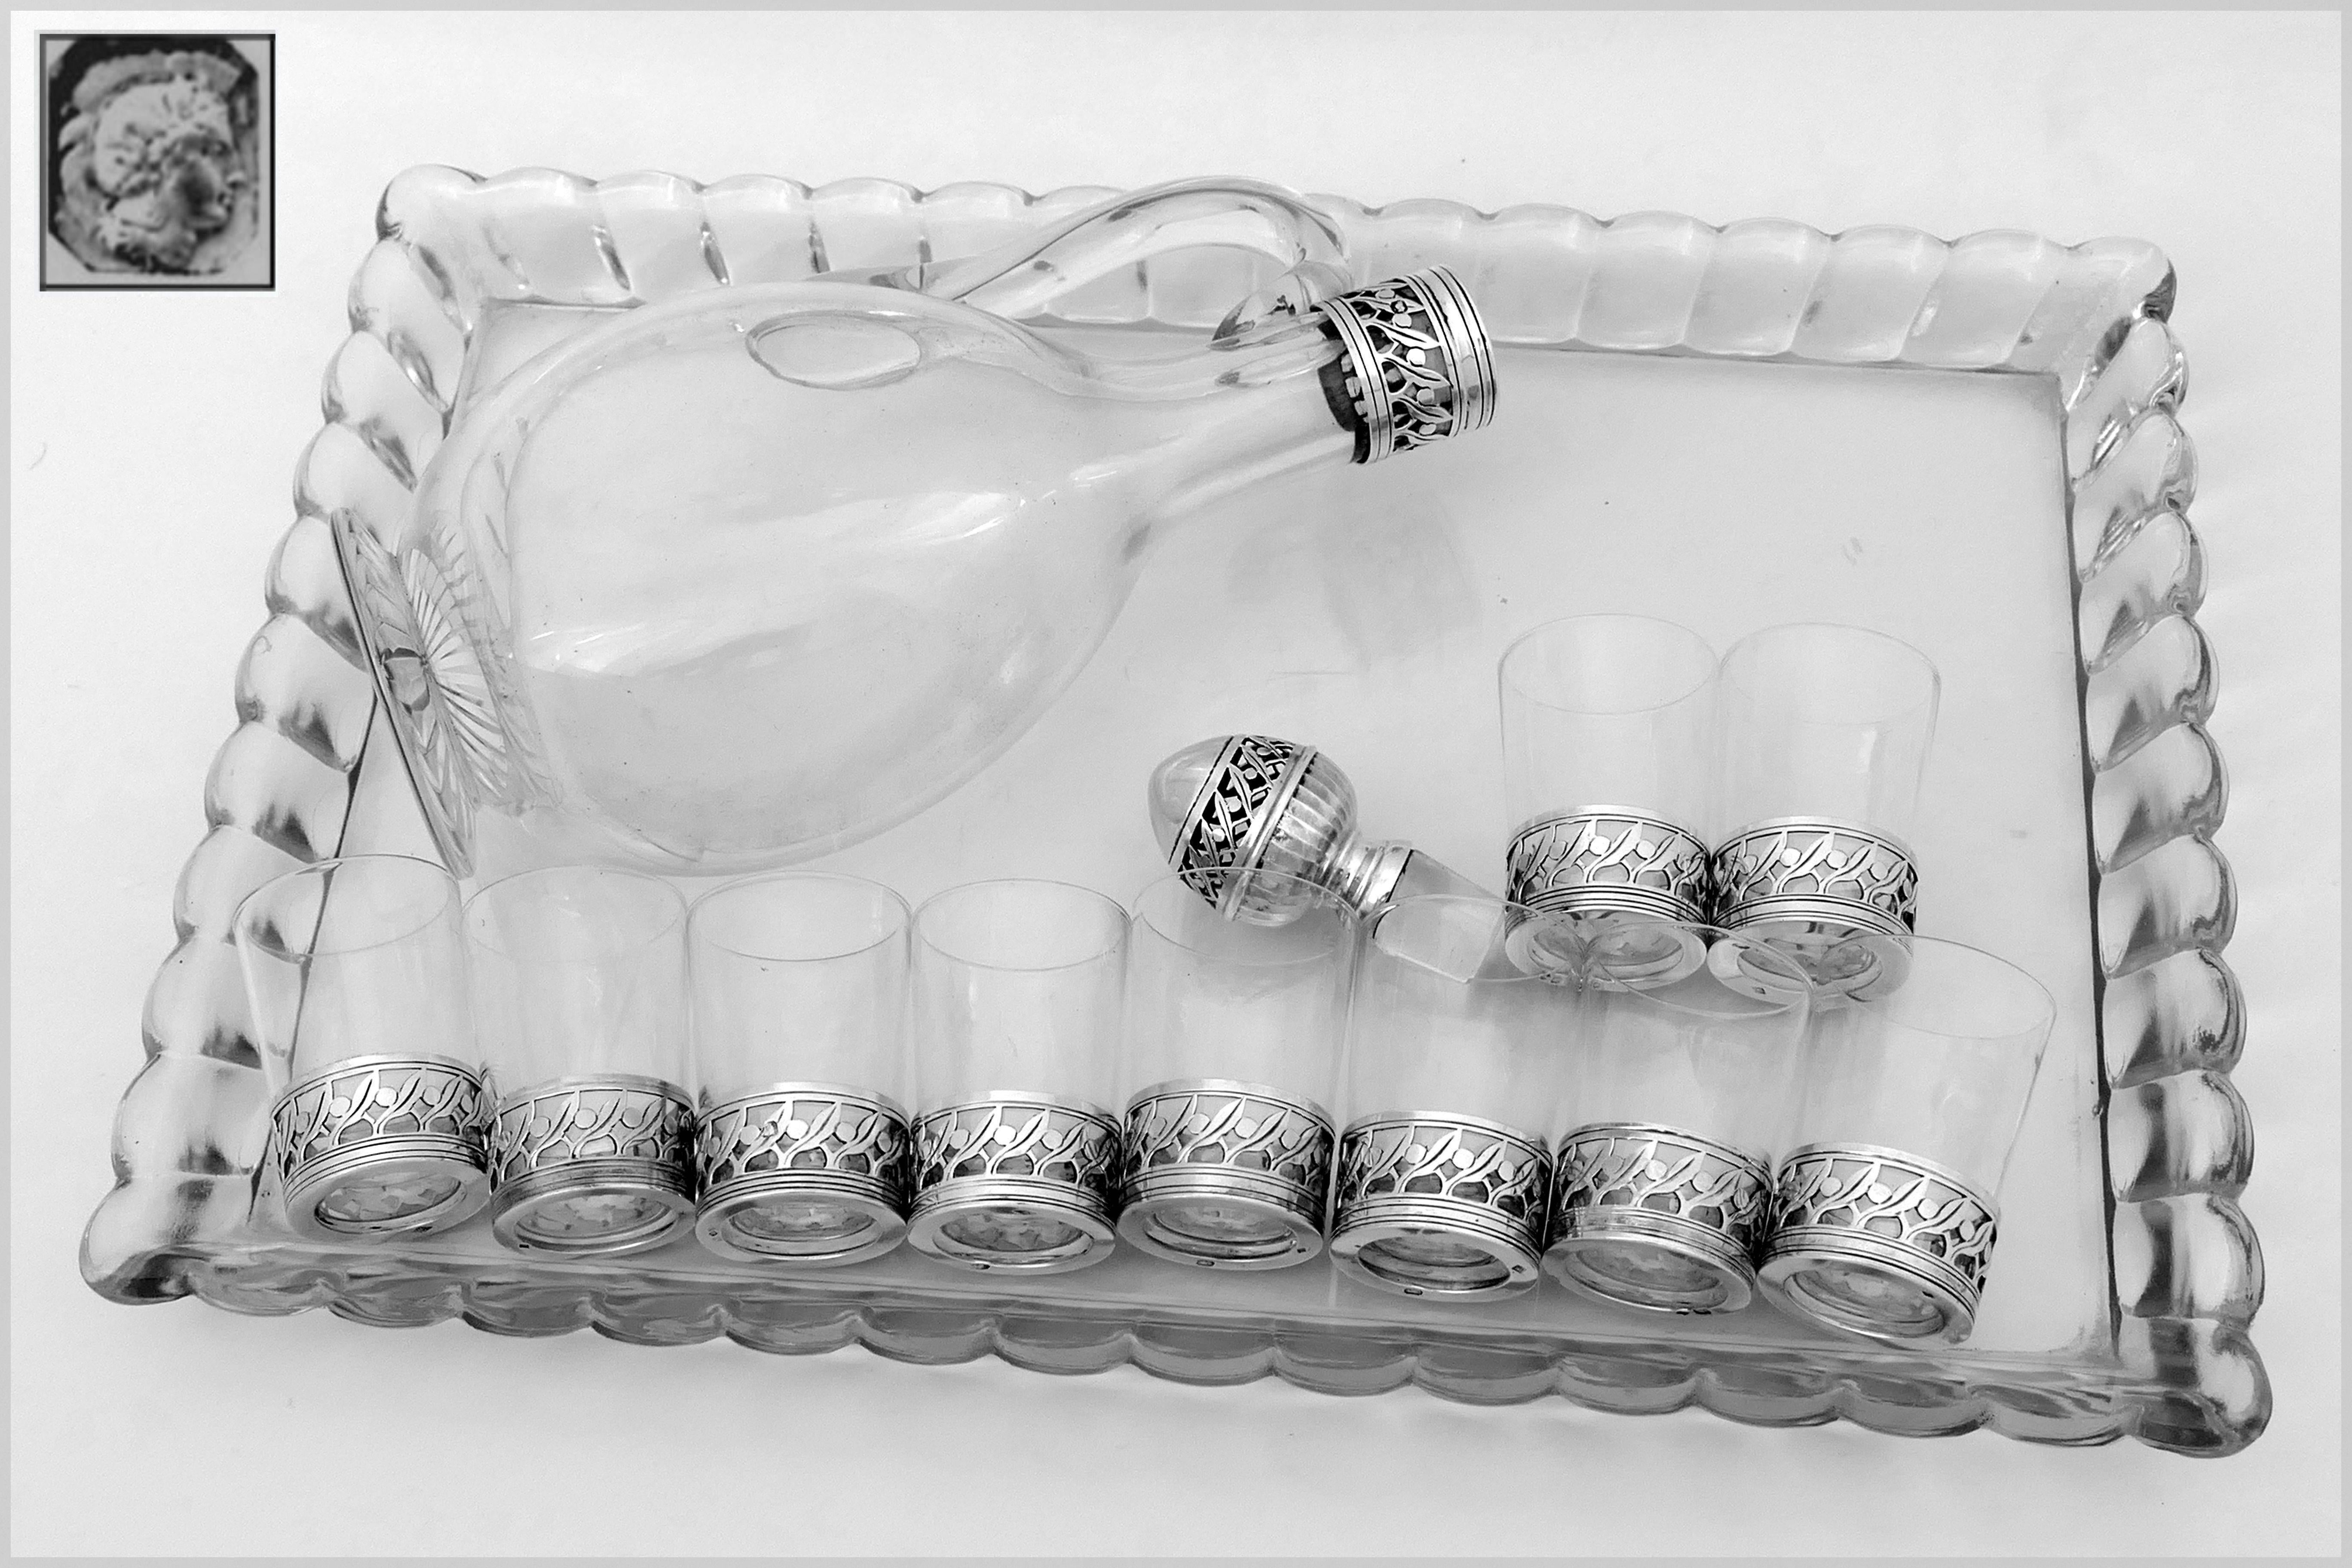 Christofle rare French sterling silver Baccarat crystal liquor or aperitif service 12 pieces.

This service includes ten sterling silver cup holders with ten original Baccarat crystal glasses, sterling silver and crystal decanter and this original